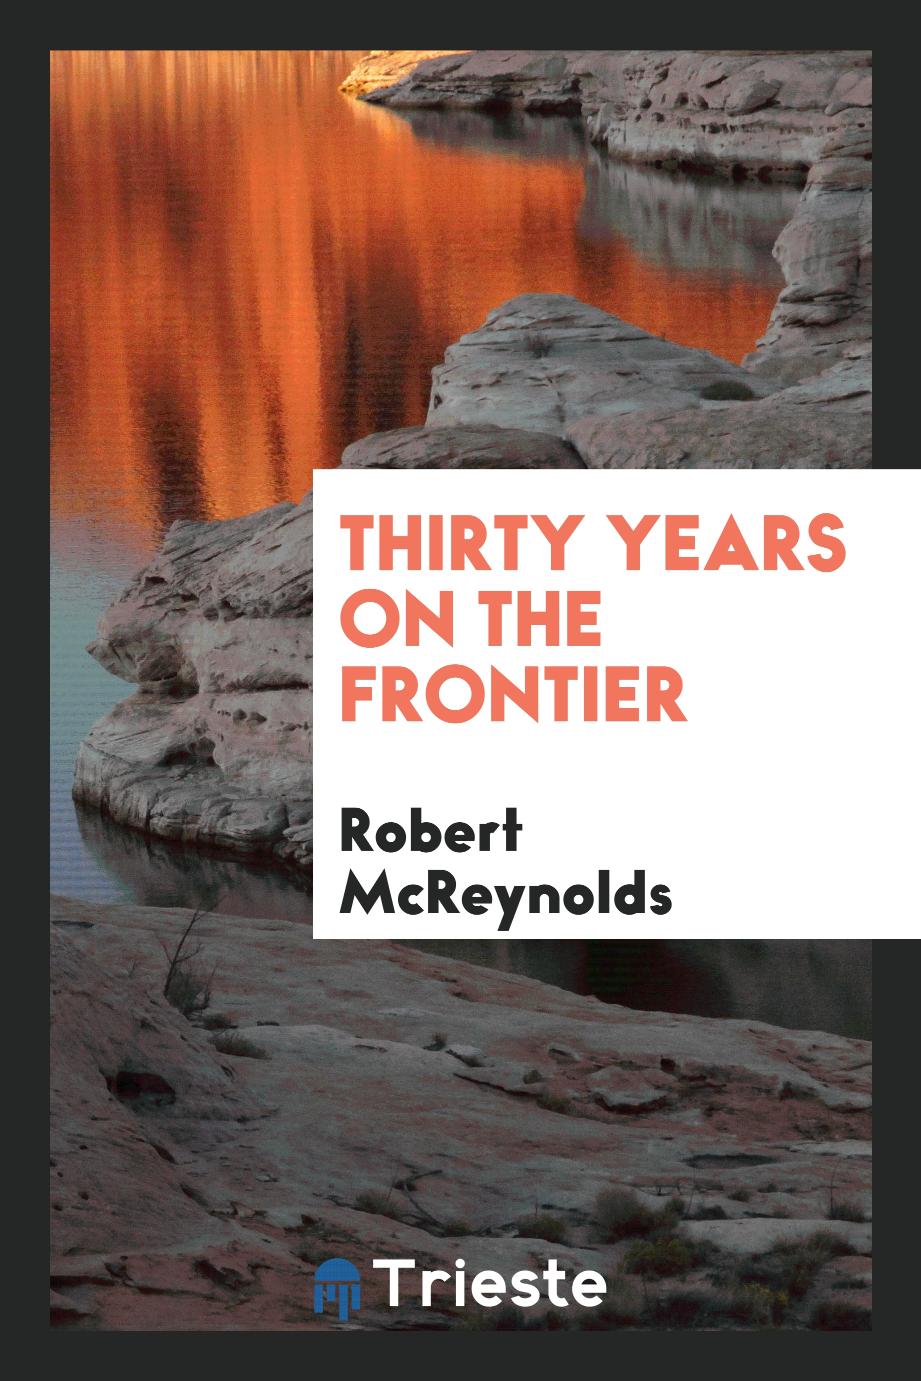 Thirty years on the frontier